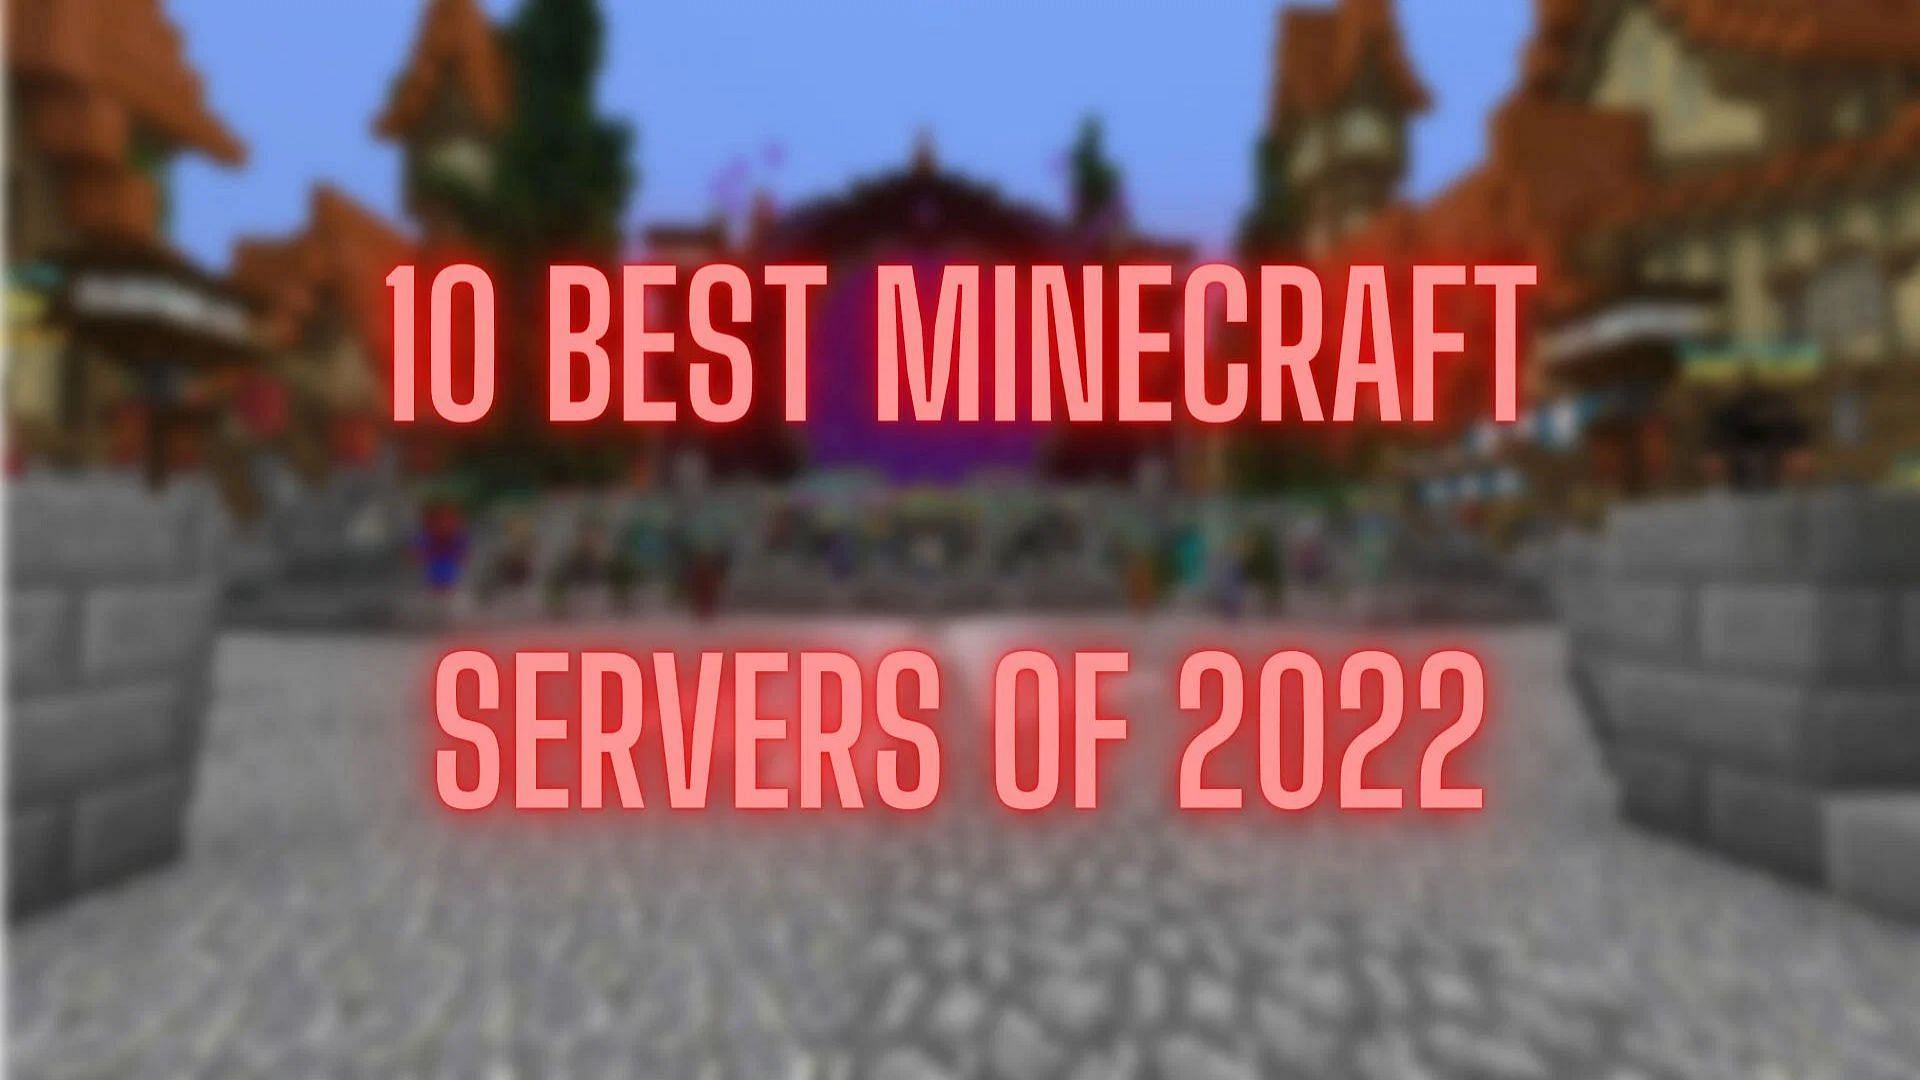 10 best Minecraft servers to play in 2022